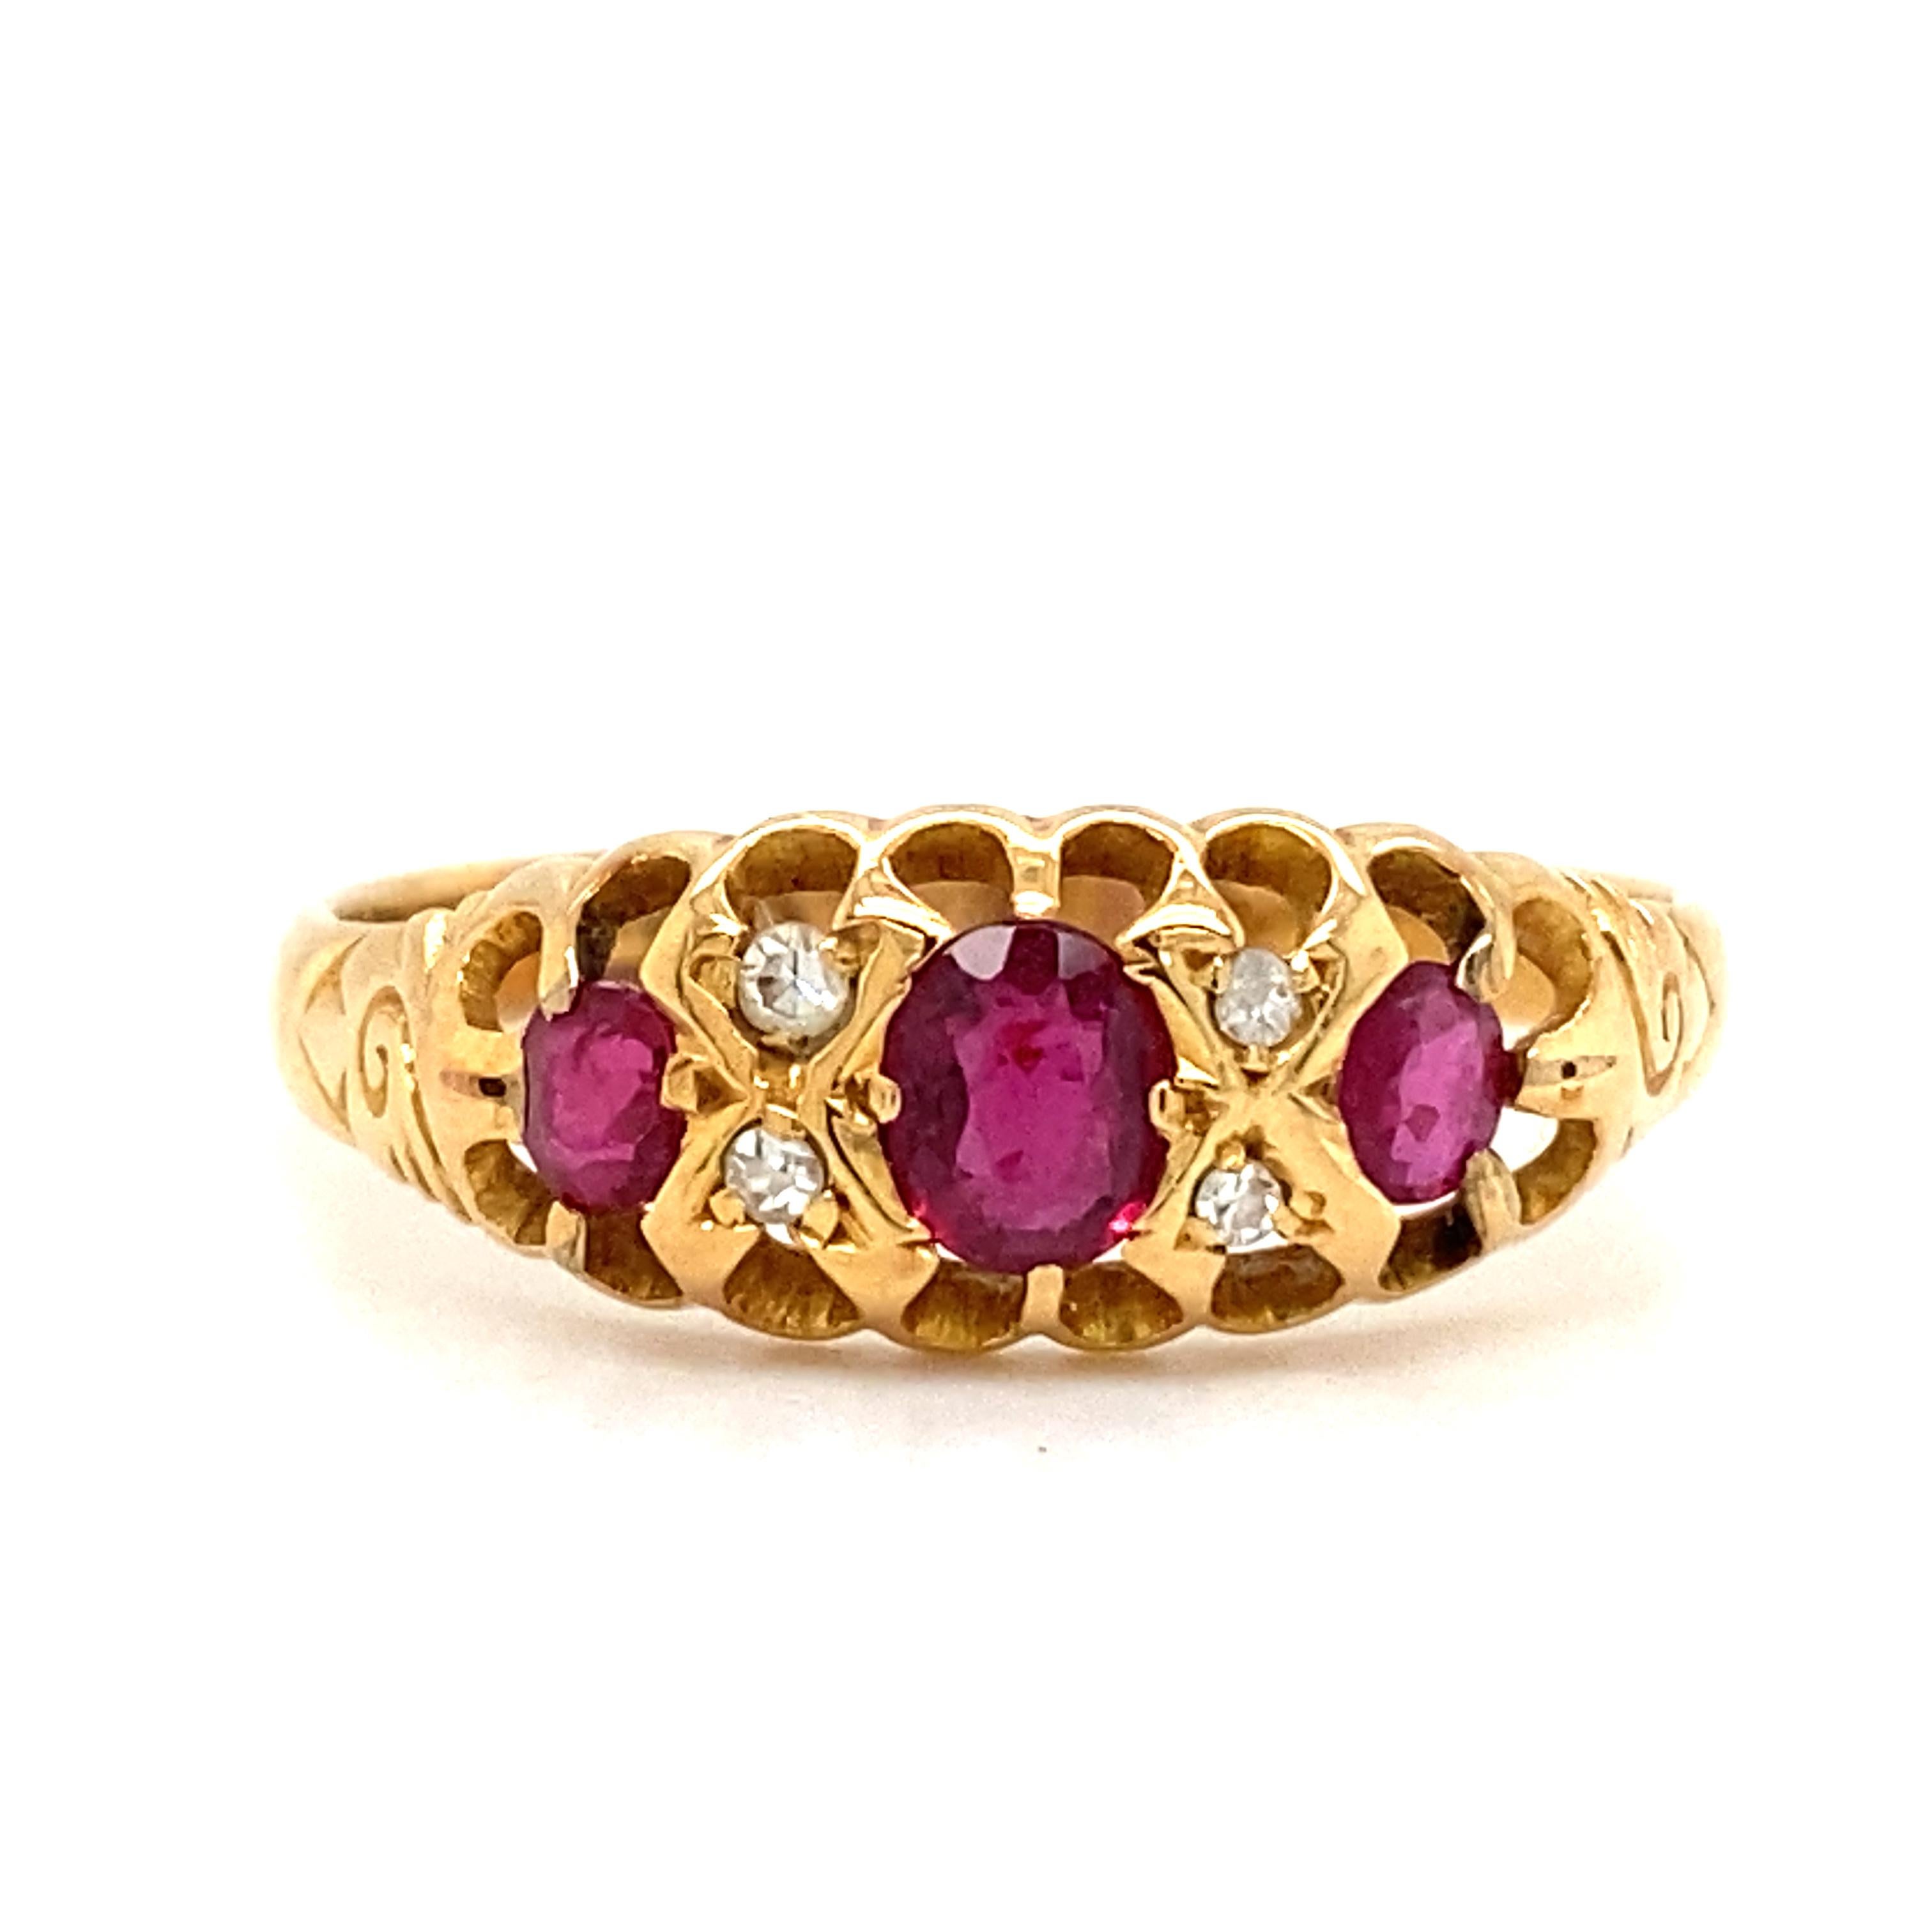 Women's or Men's Circa 1910s Edwardian Oval Ruby and Diamond Ring in 14 Karat Yellow Gold For Sale